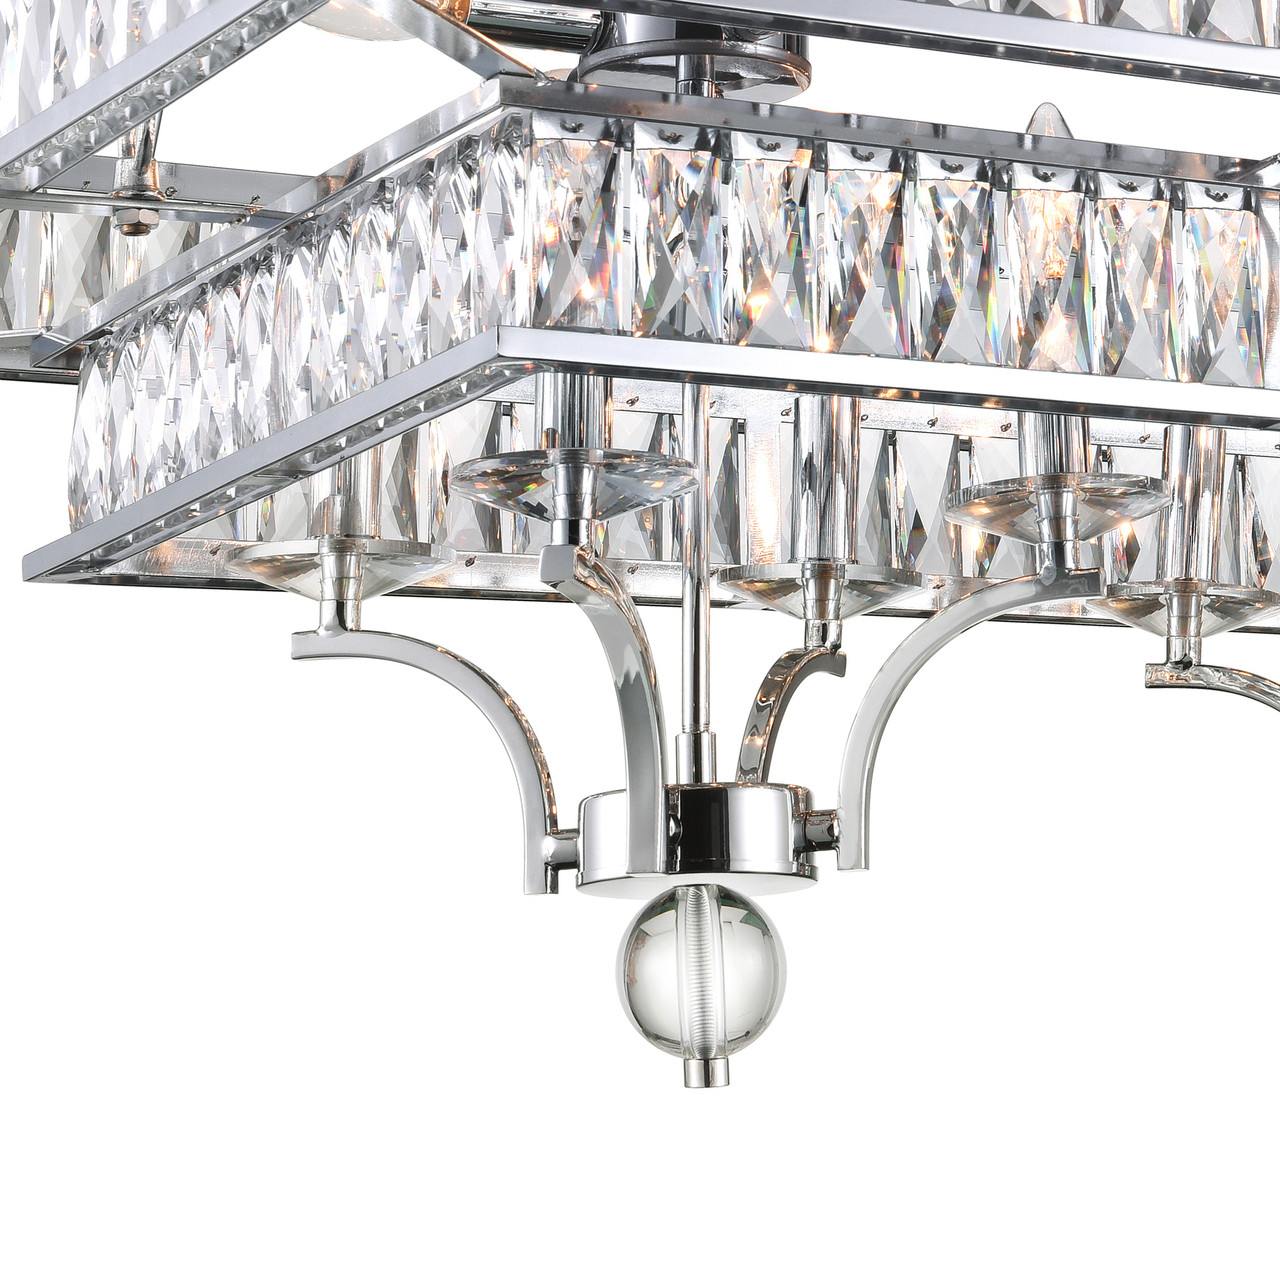 CWI LIGHTING 9972P47-20-601 20 Light Island Chandelier with Chrome finish